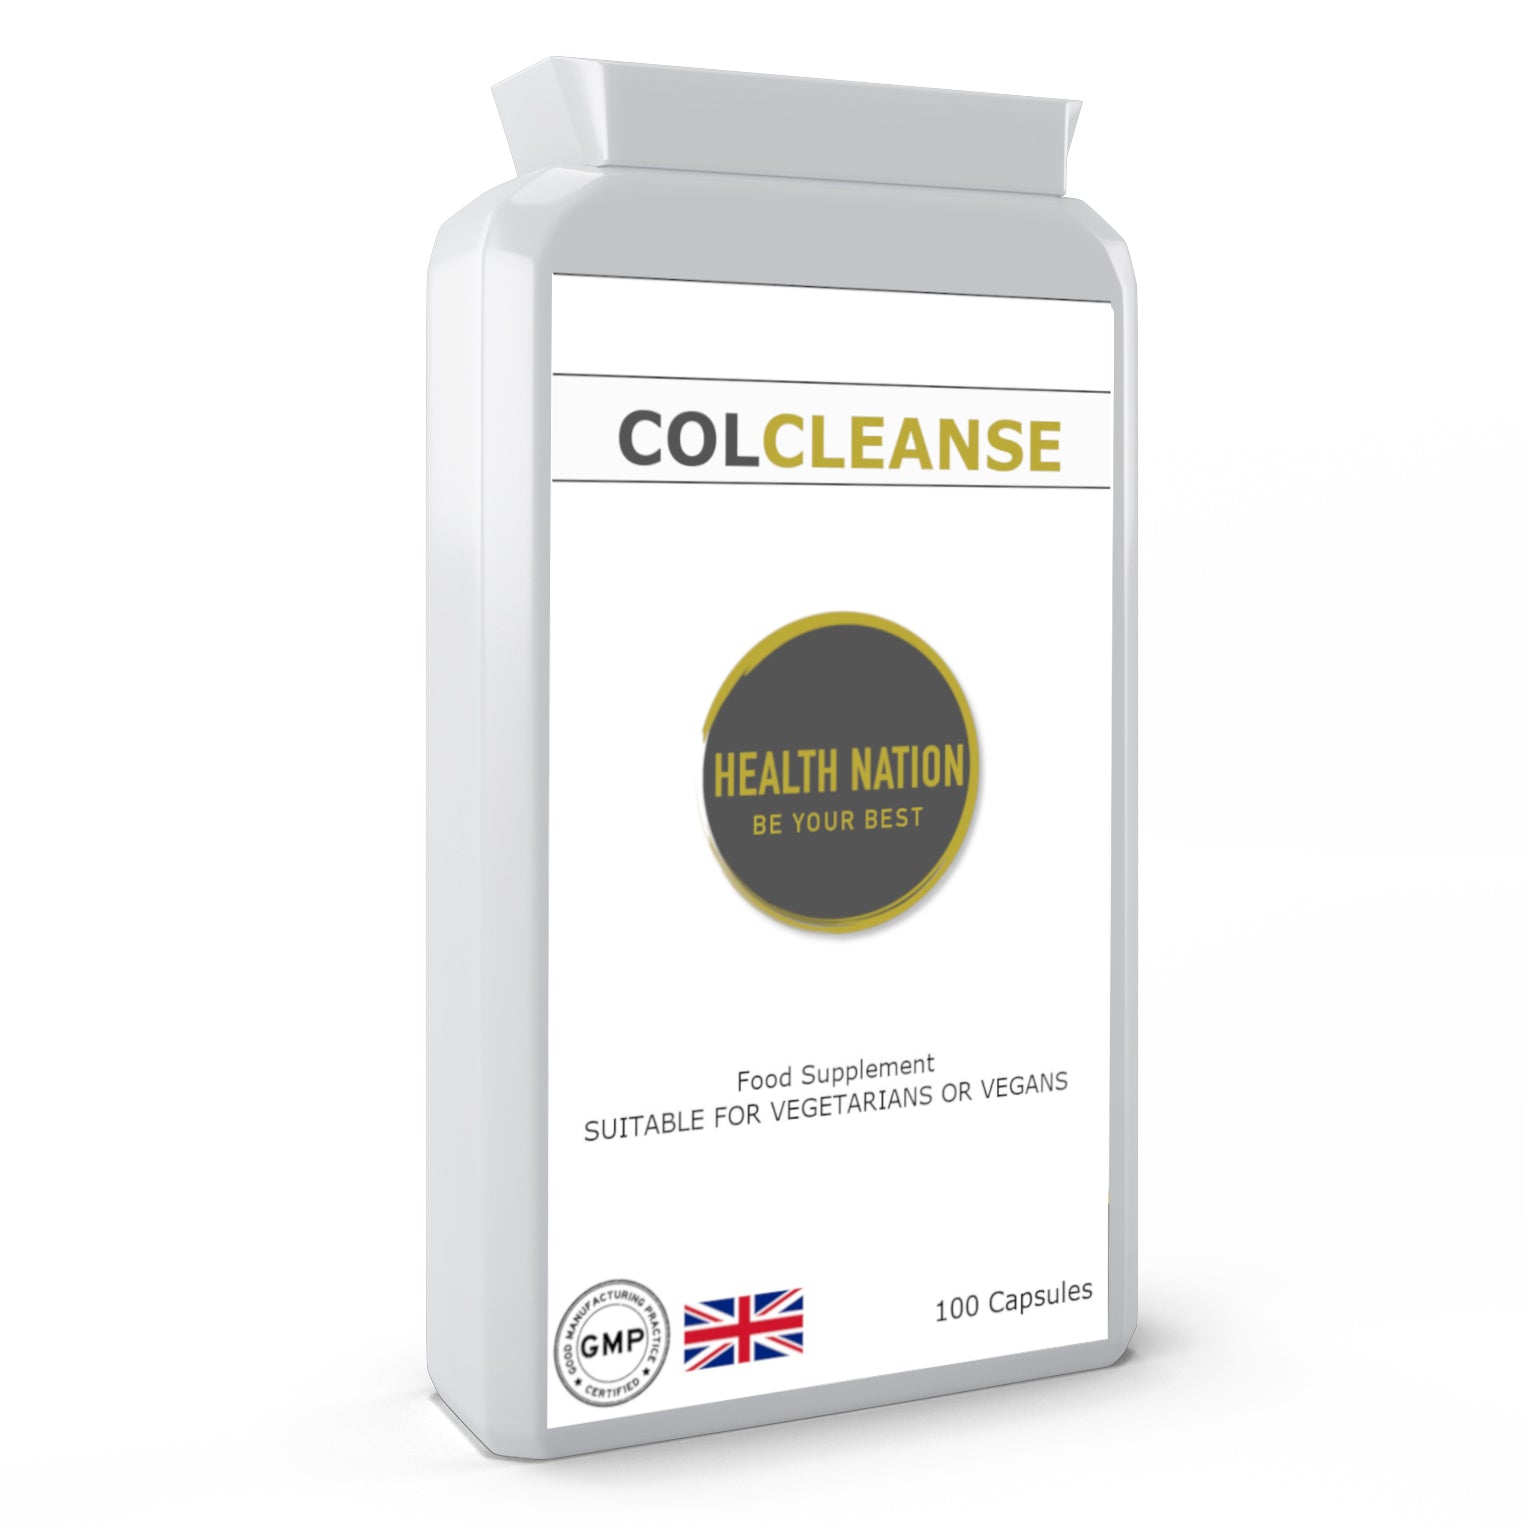 ColCleanse | Helps with Mood, Digestion, Vibrant Skin and Colon Cleansing | Made in UK | 100 Capsules - Health Nation